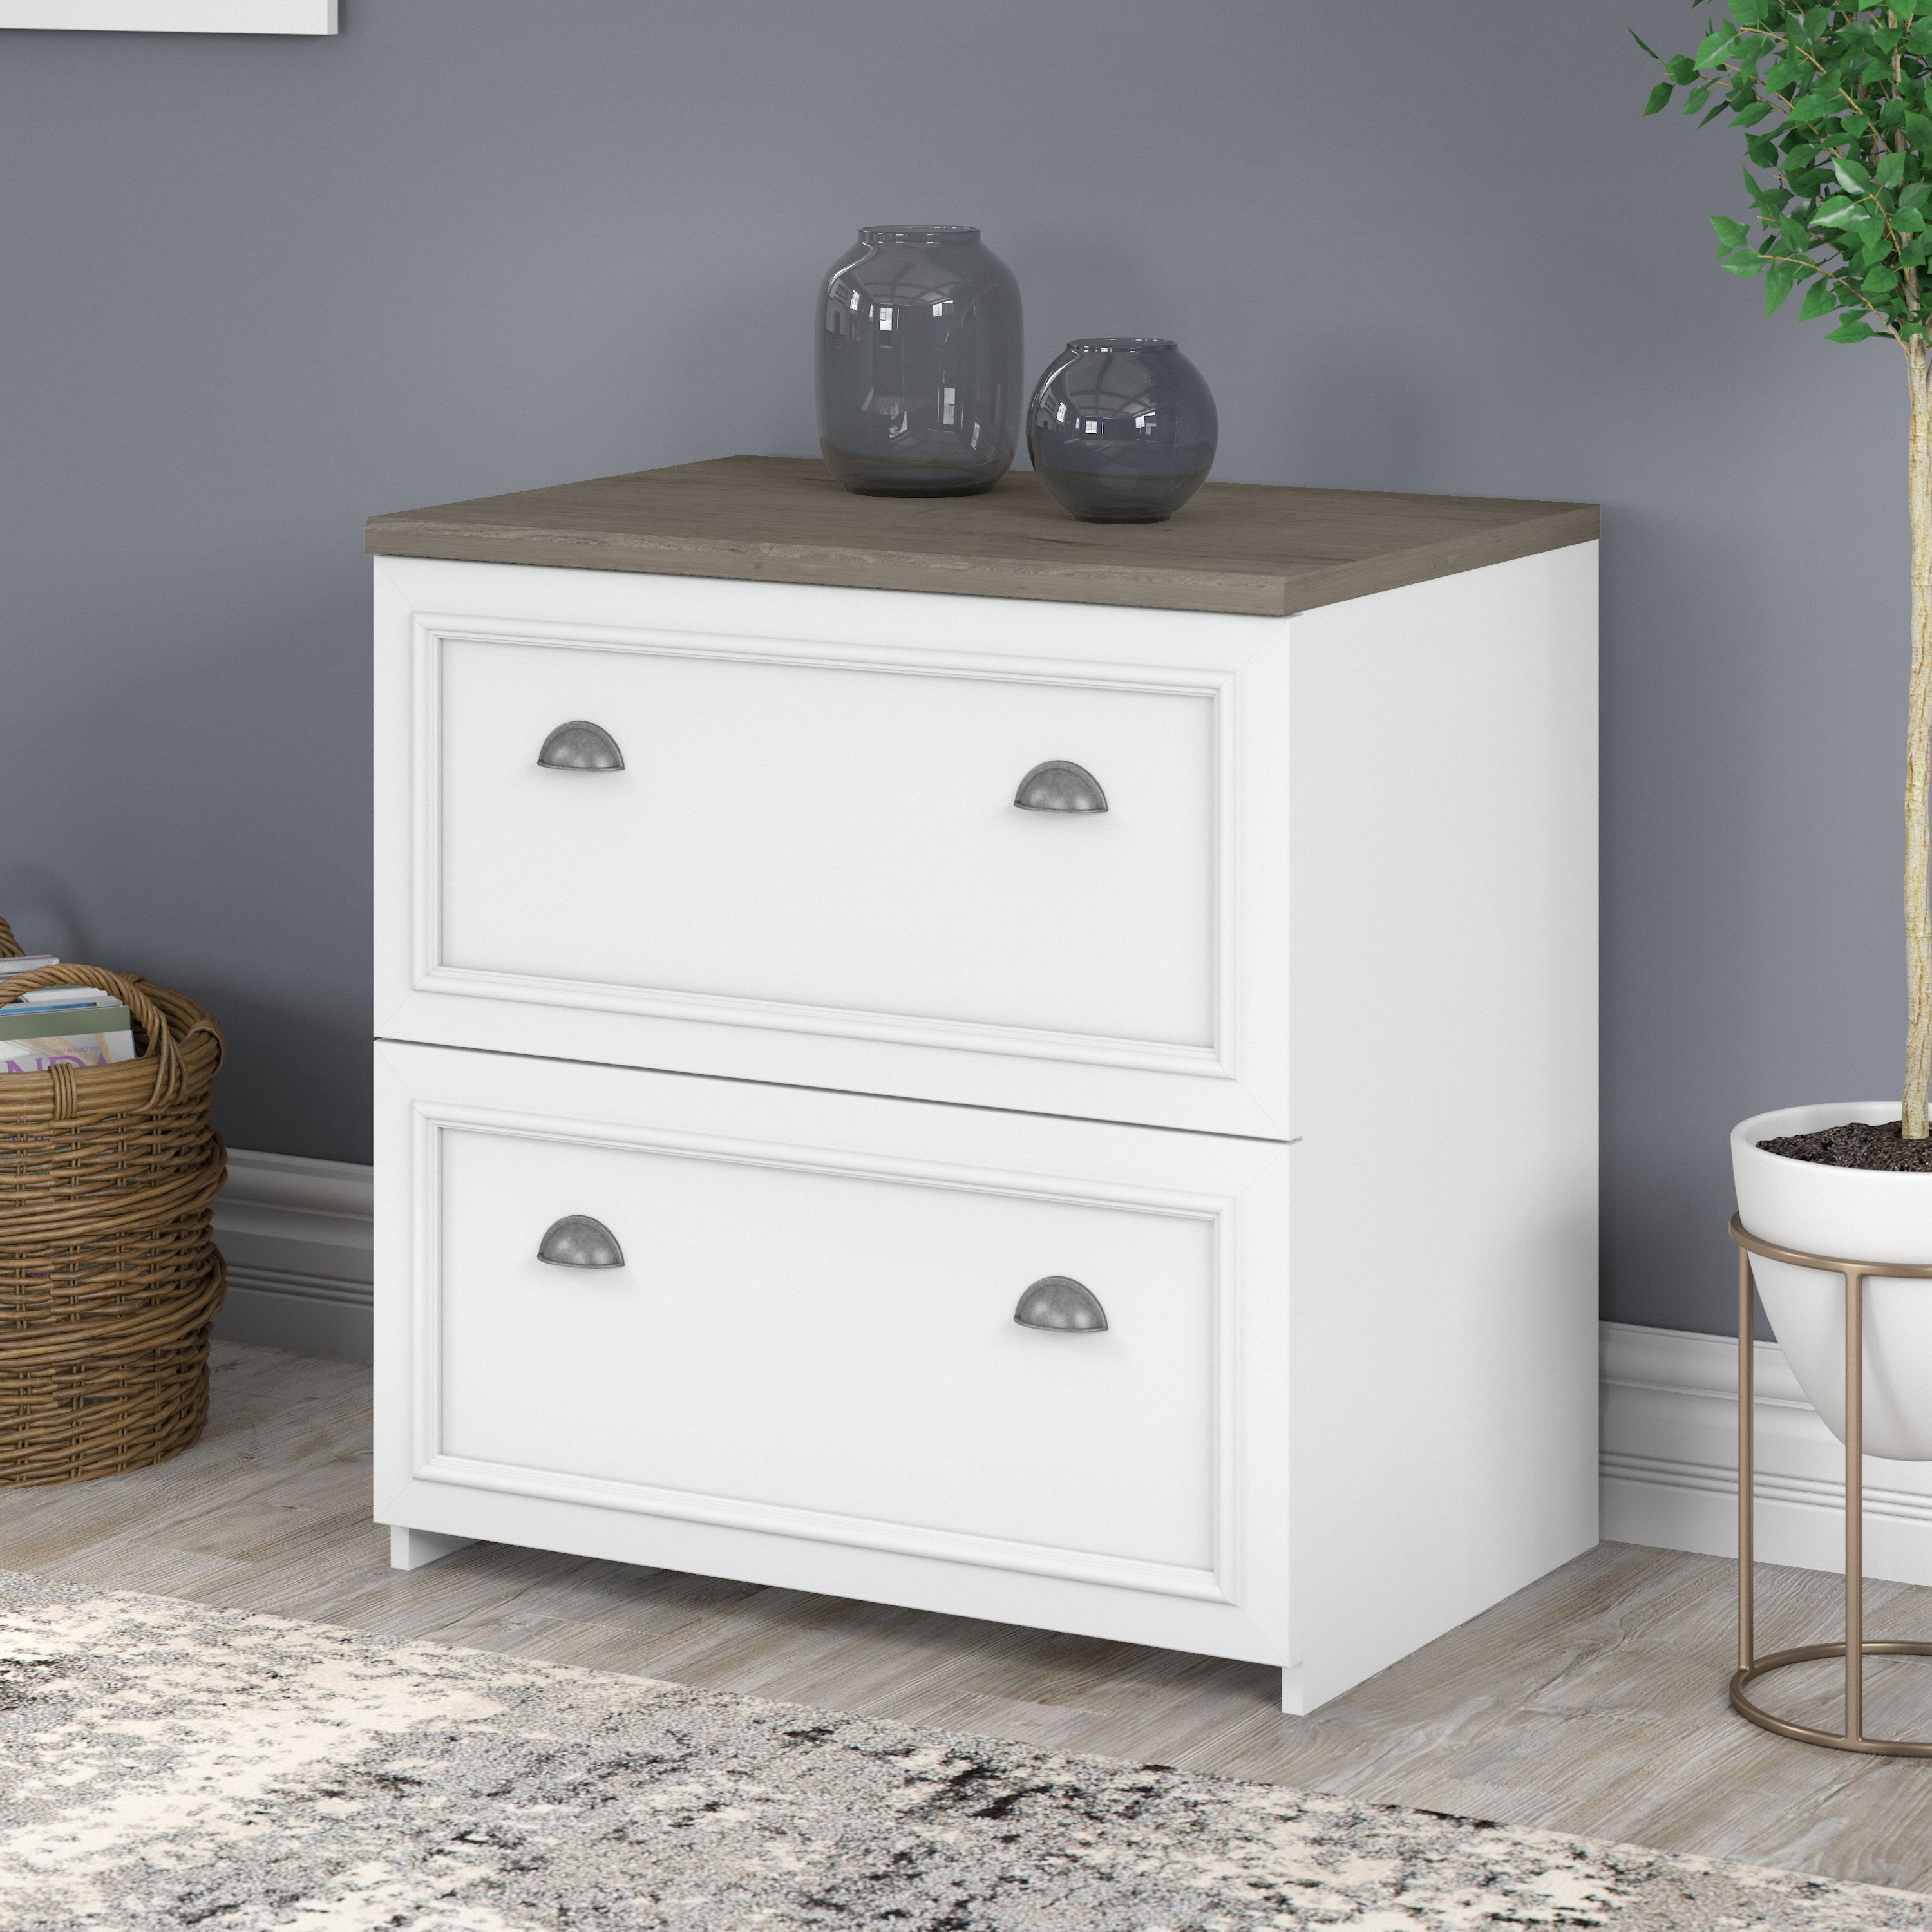 Shop Bush Furniture Fairview 2 Drawer Lateral File Cabinet 01 WC53681-03 #color_shiplap gray/pure white